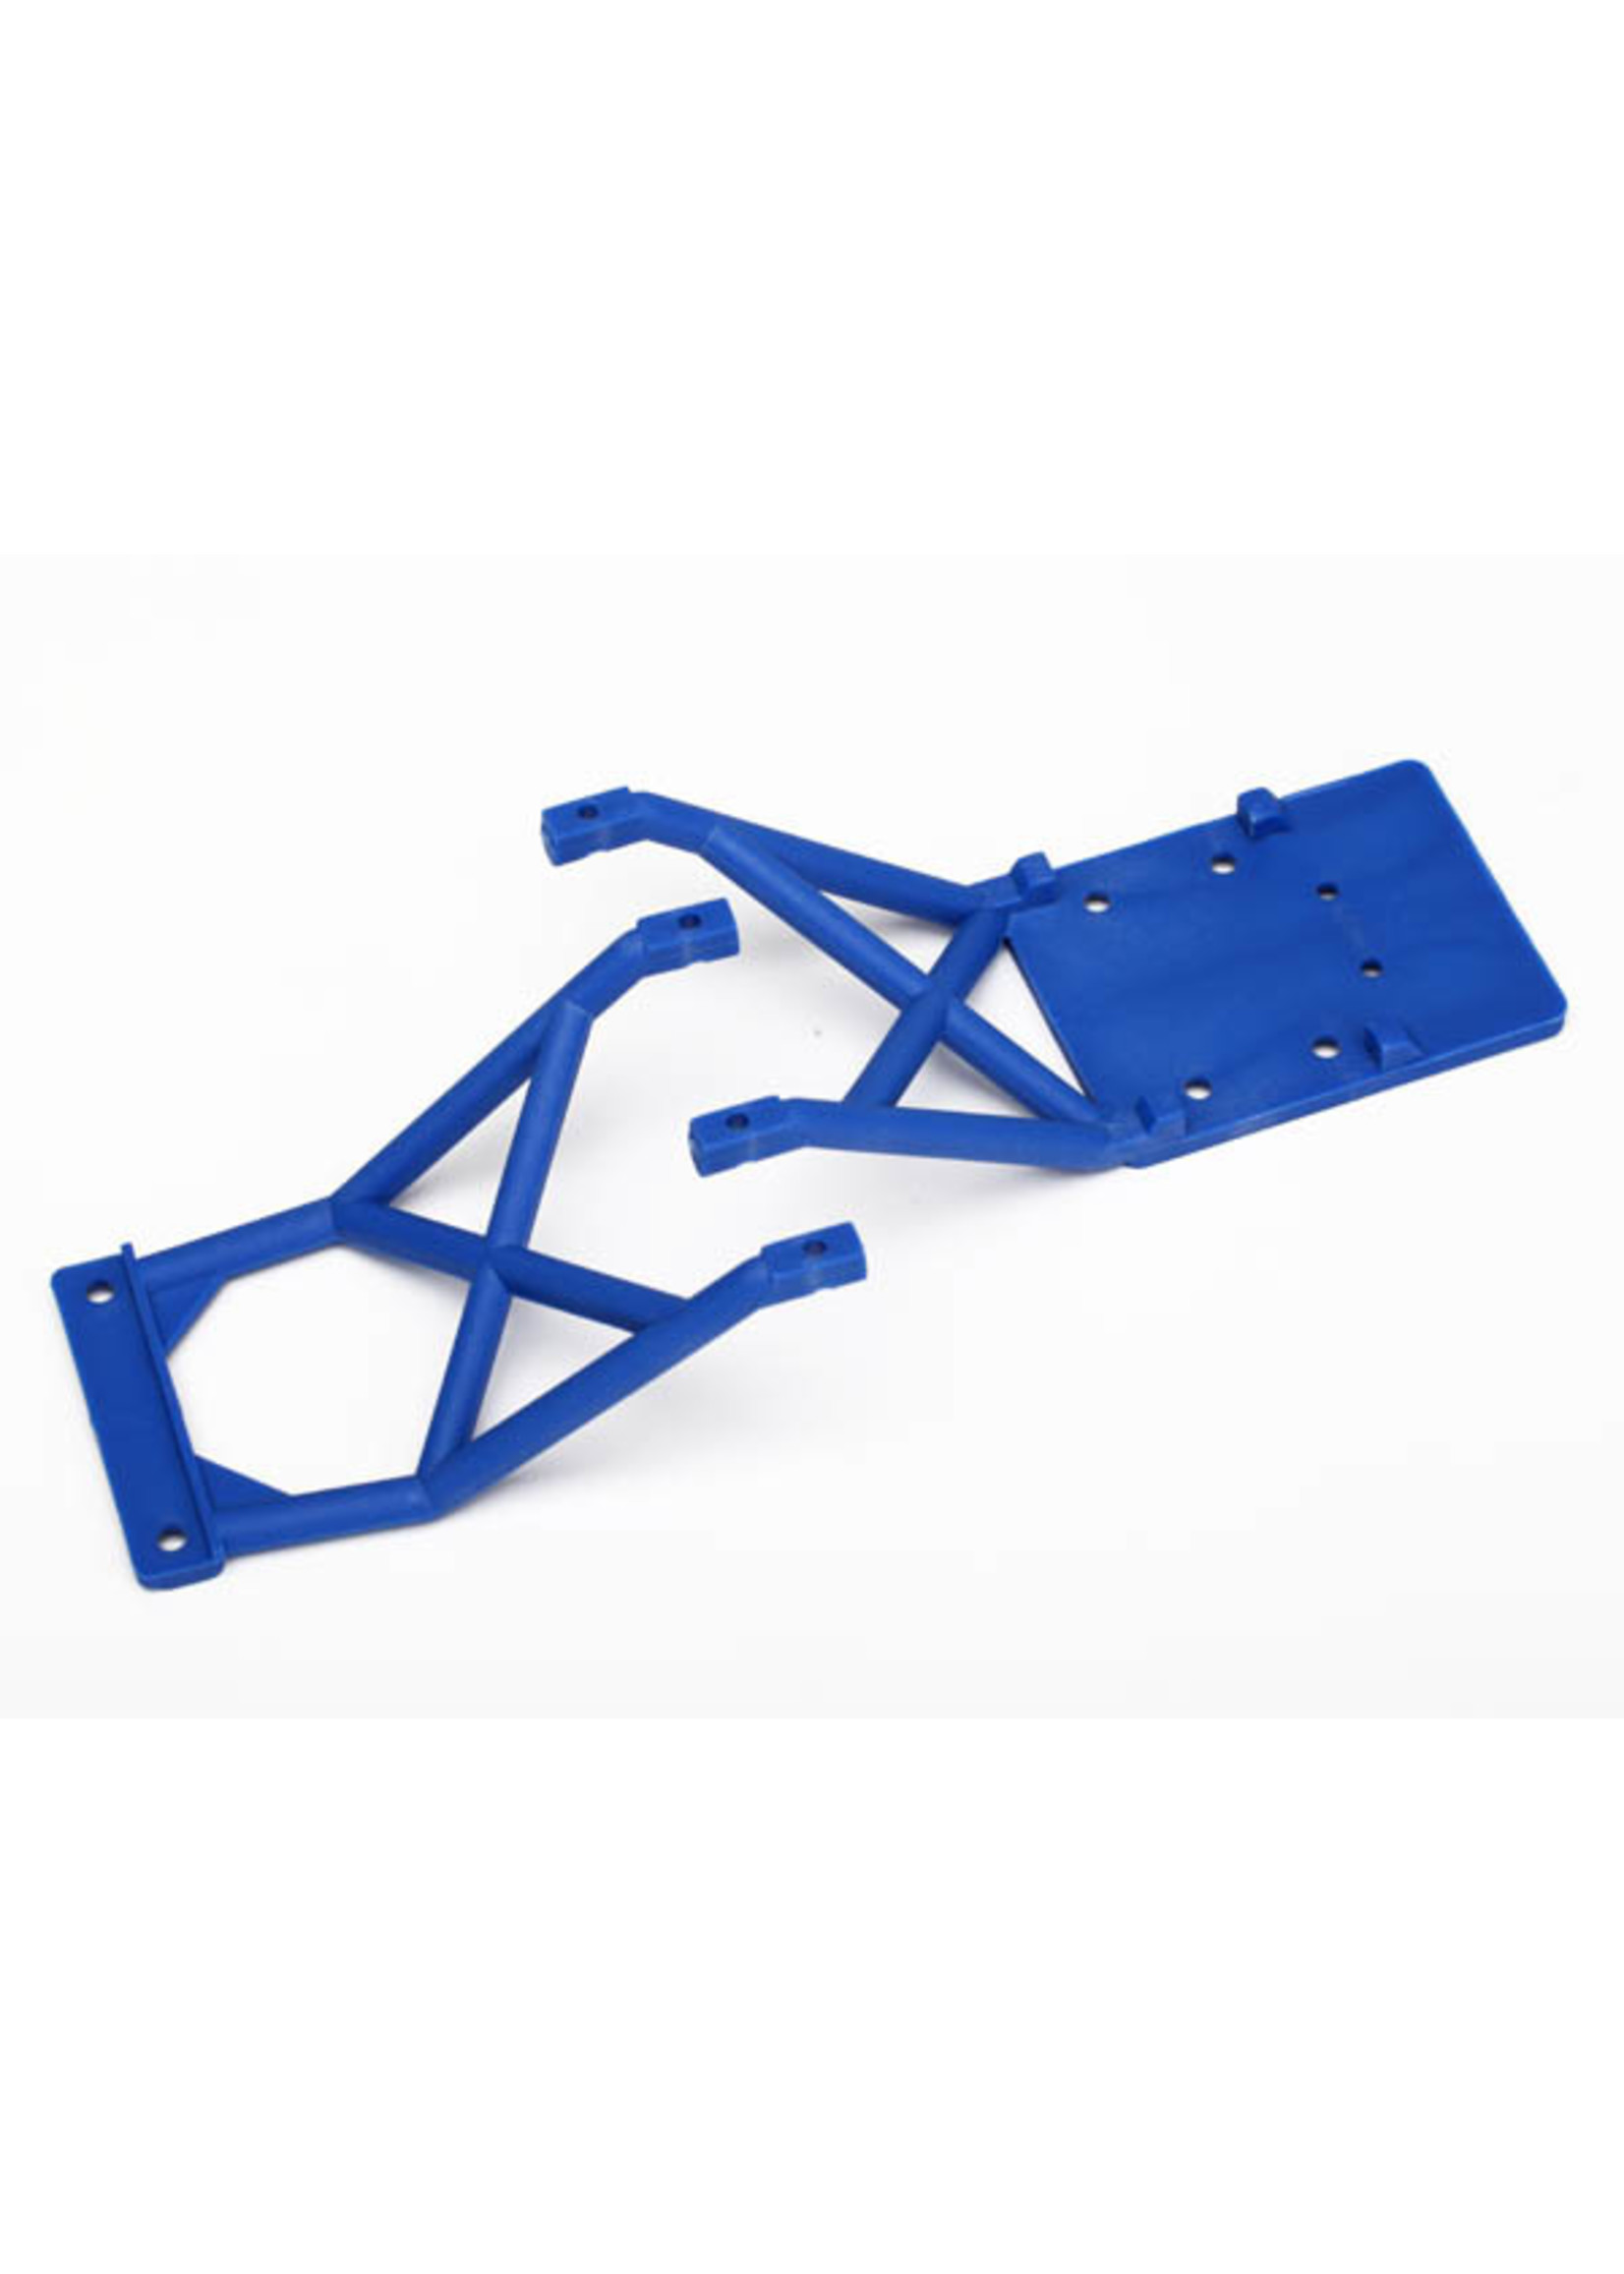 Traxxas 3623X - Skid Plates, Front & Rear - Blue